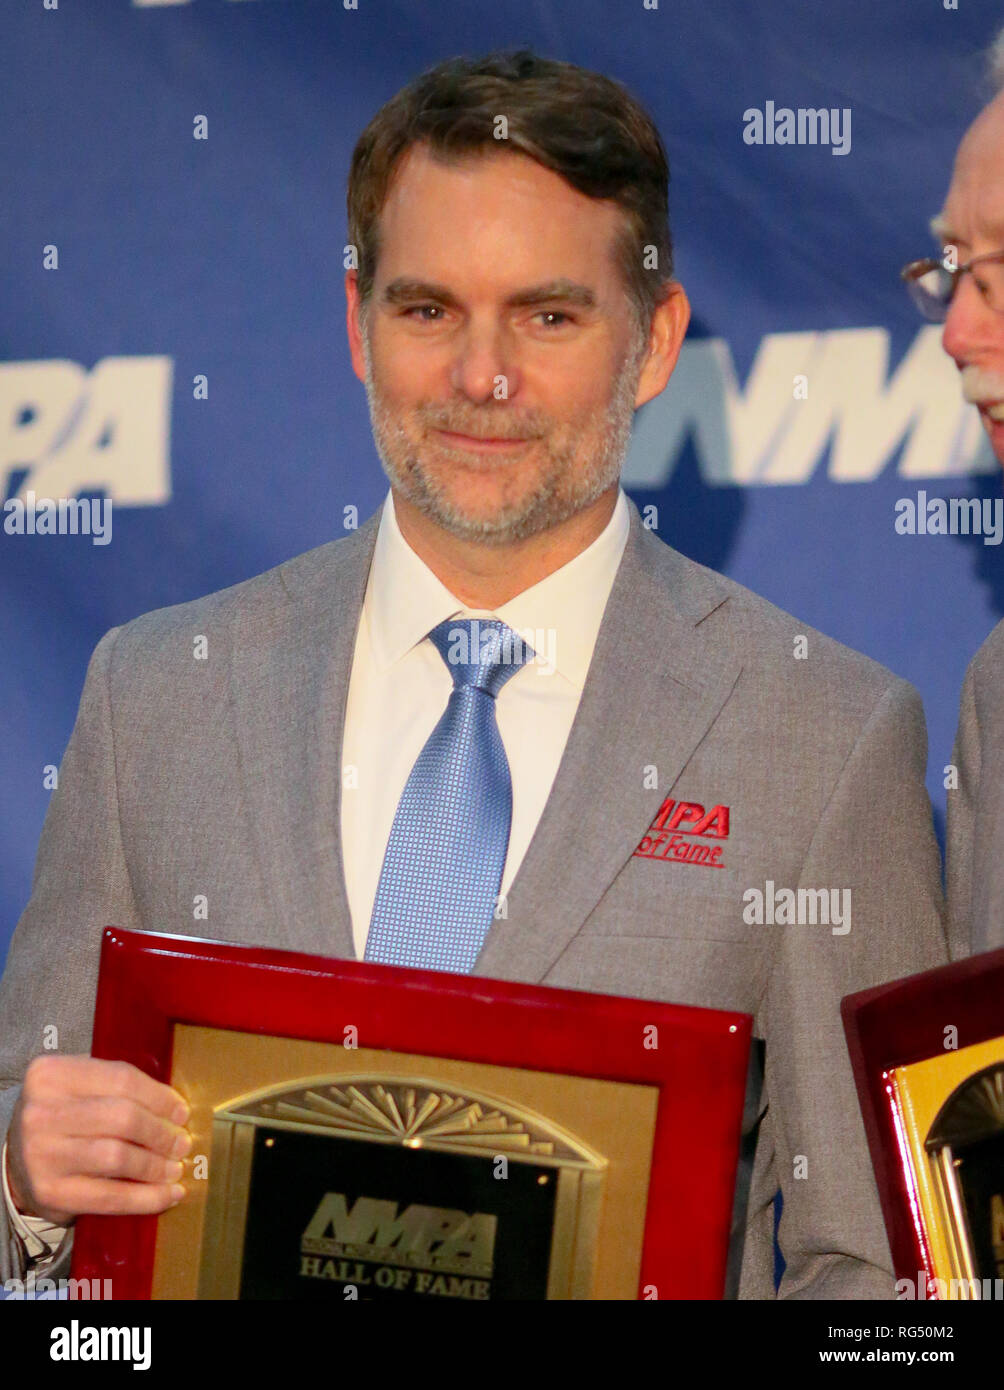 Charlotte, North Carolina, USA. 27th Jan, 2019. Retired NASCAR Driver JEFF GORDON speaking during his induction ceremony into the 2019 National Motorsports Press Association (NMPA) Hall of Fame on January 27, 2019 in Charlotte, N.C. Credit: Ed Clemente/ZUMA Wire/Alamy Live News Stock Photo